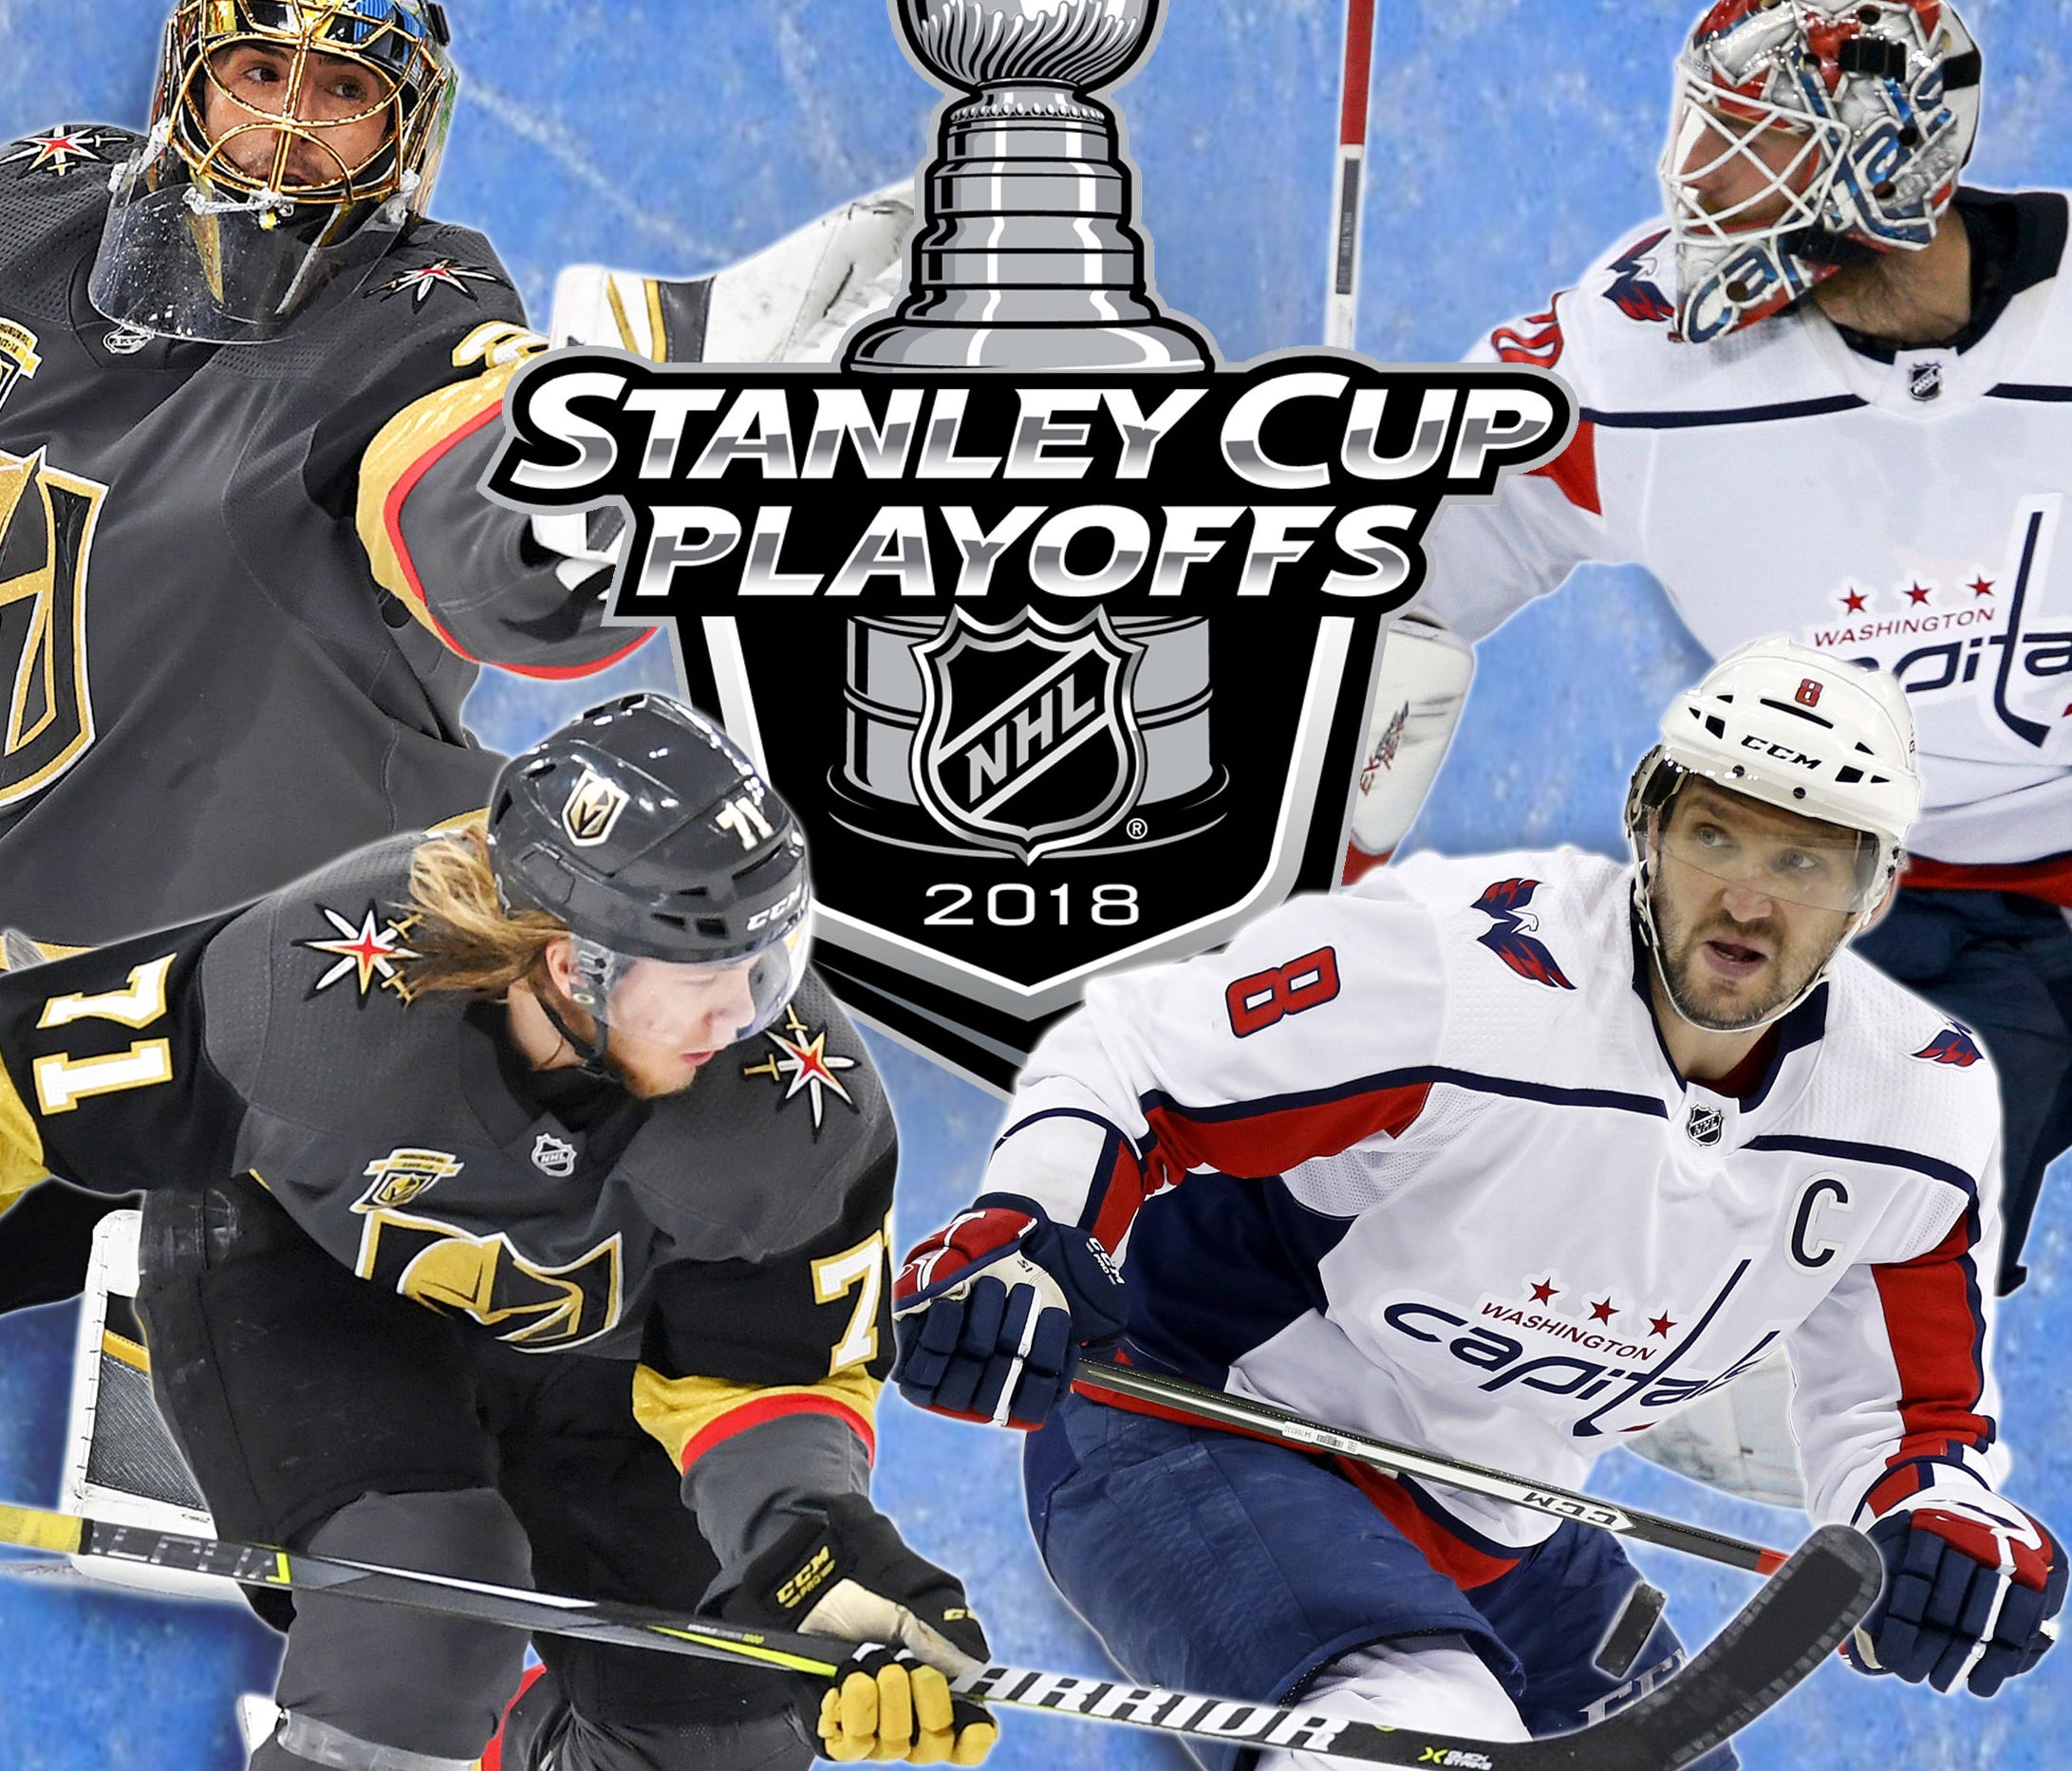 One team will win its first Stanley Cup. Will it be the Golden Knights in their inaugural season or the Capitals in their 44th?